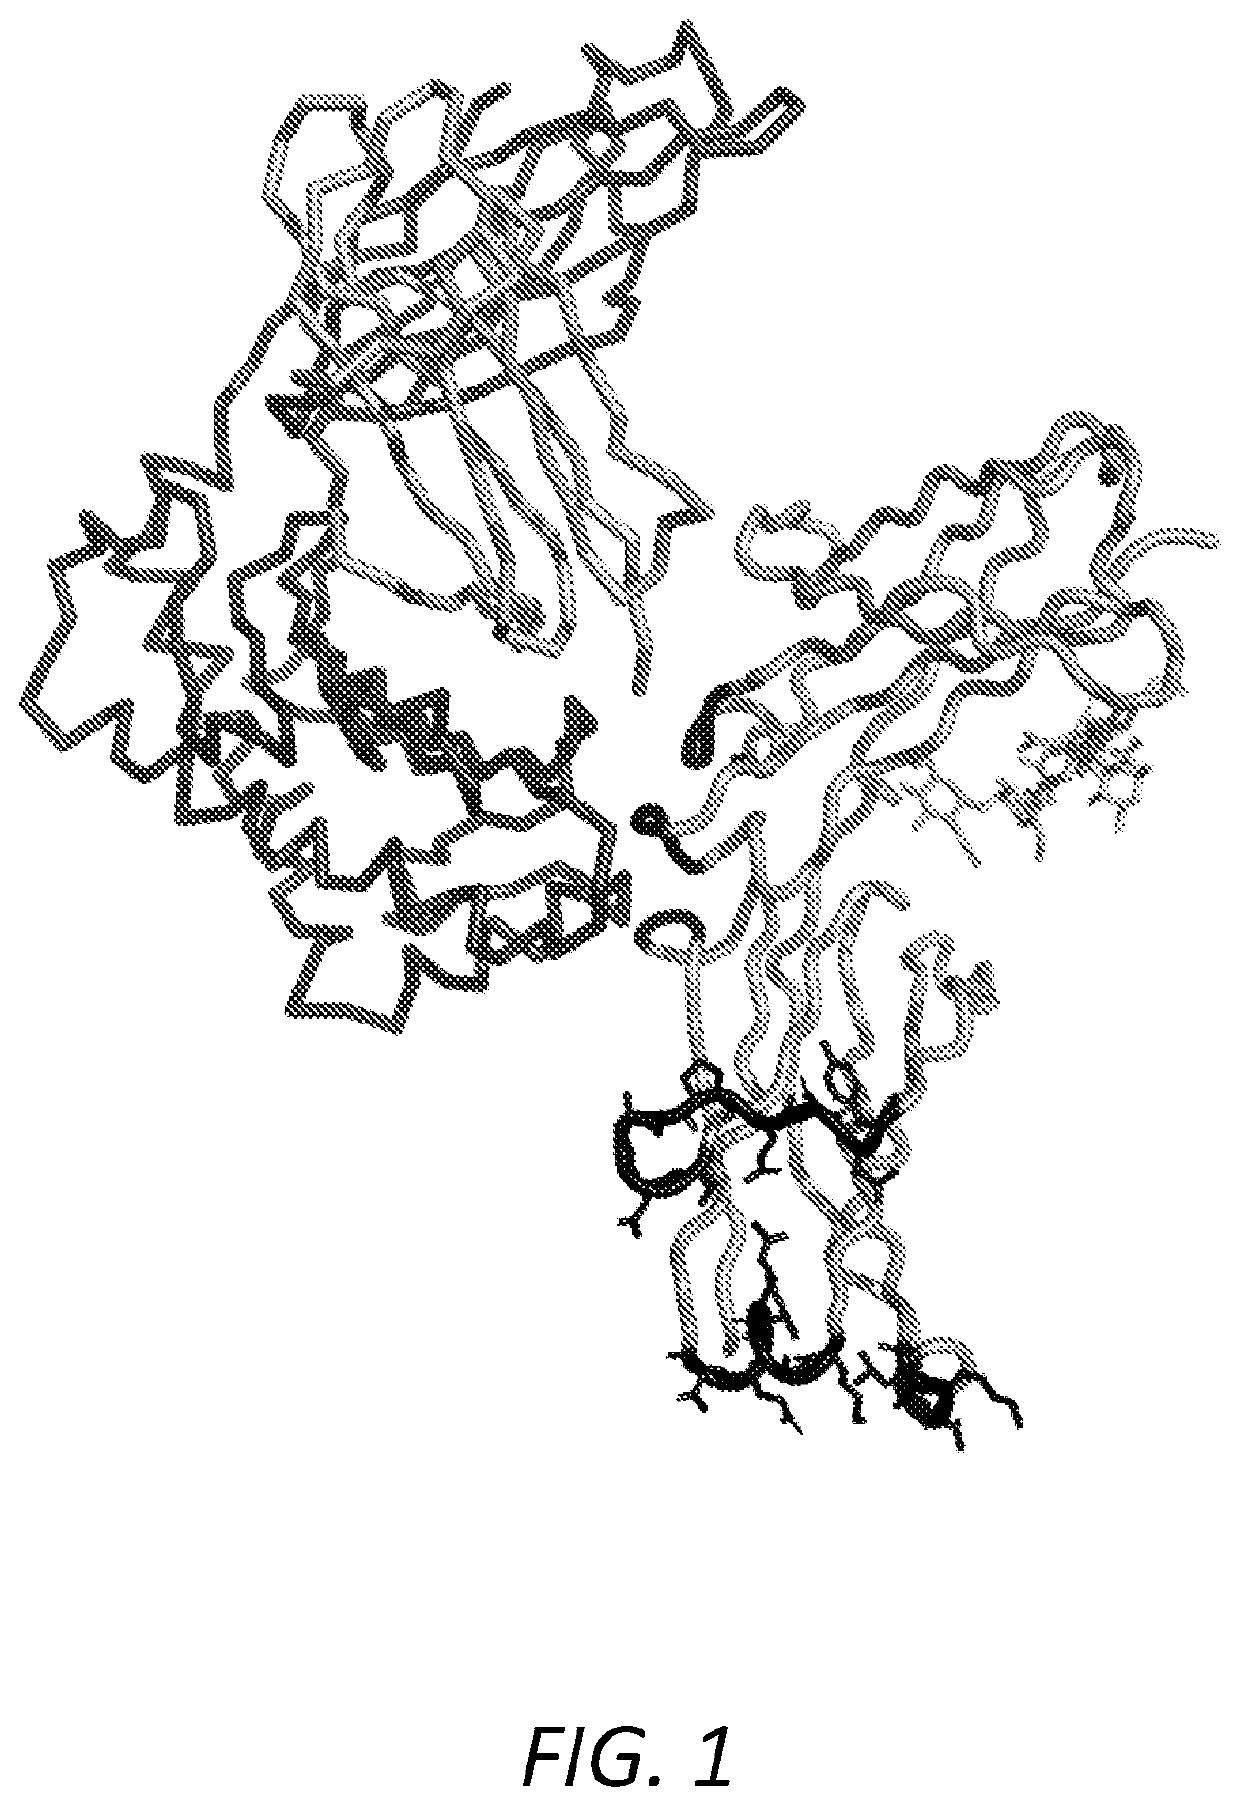 Ch3 domain epitope tags